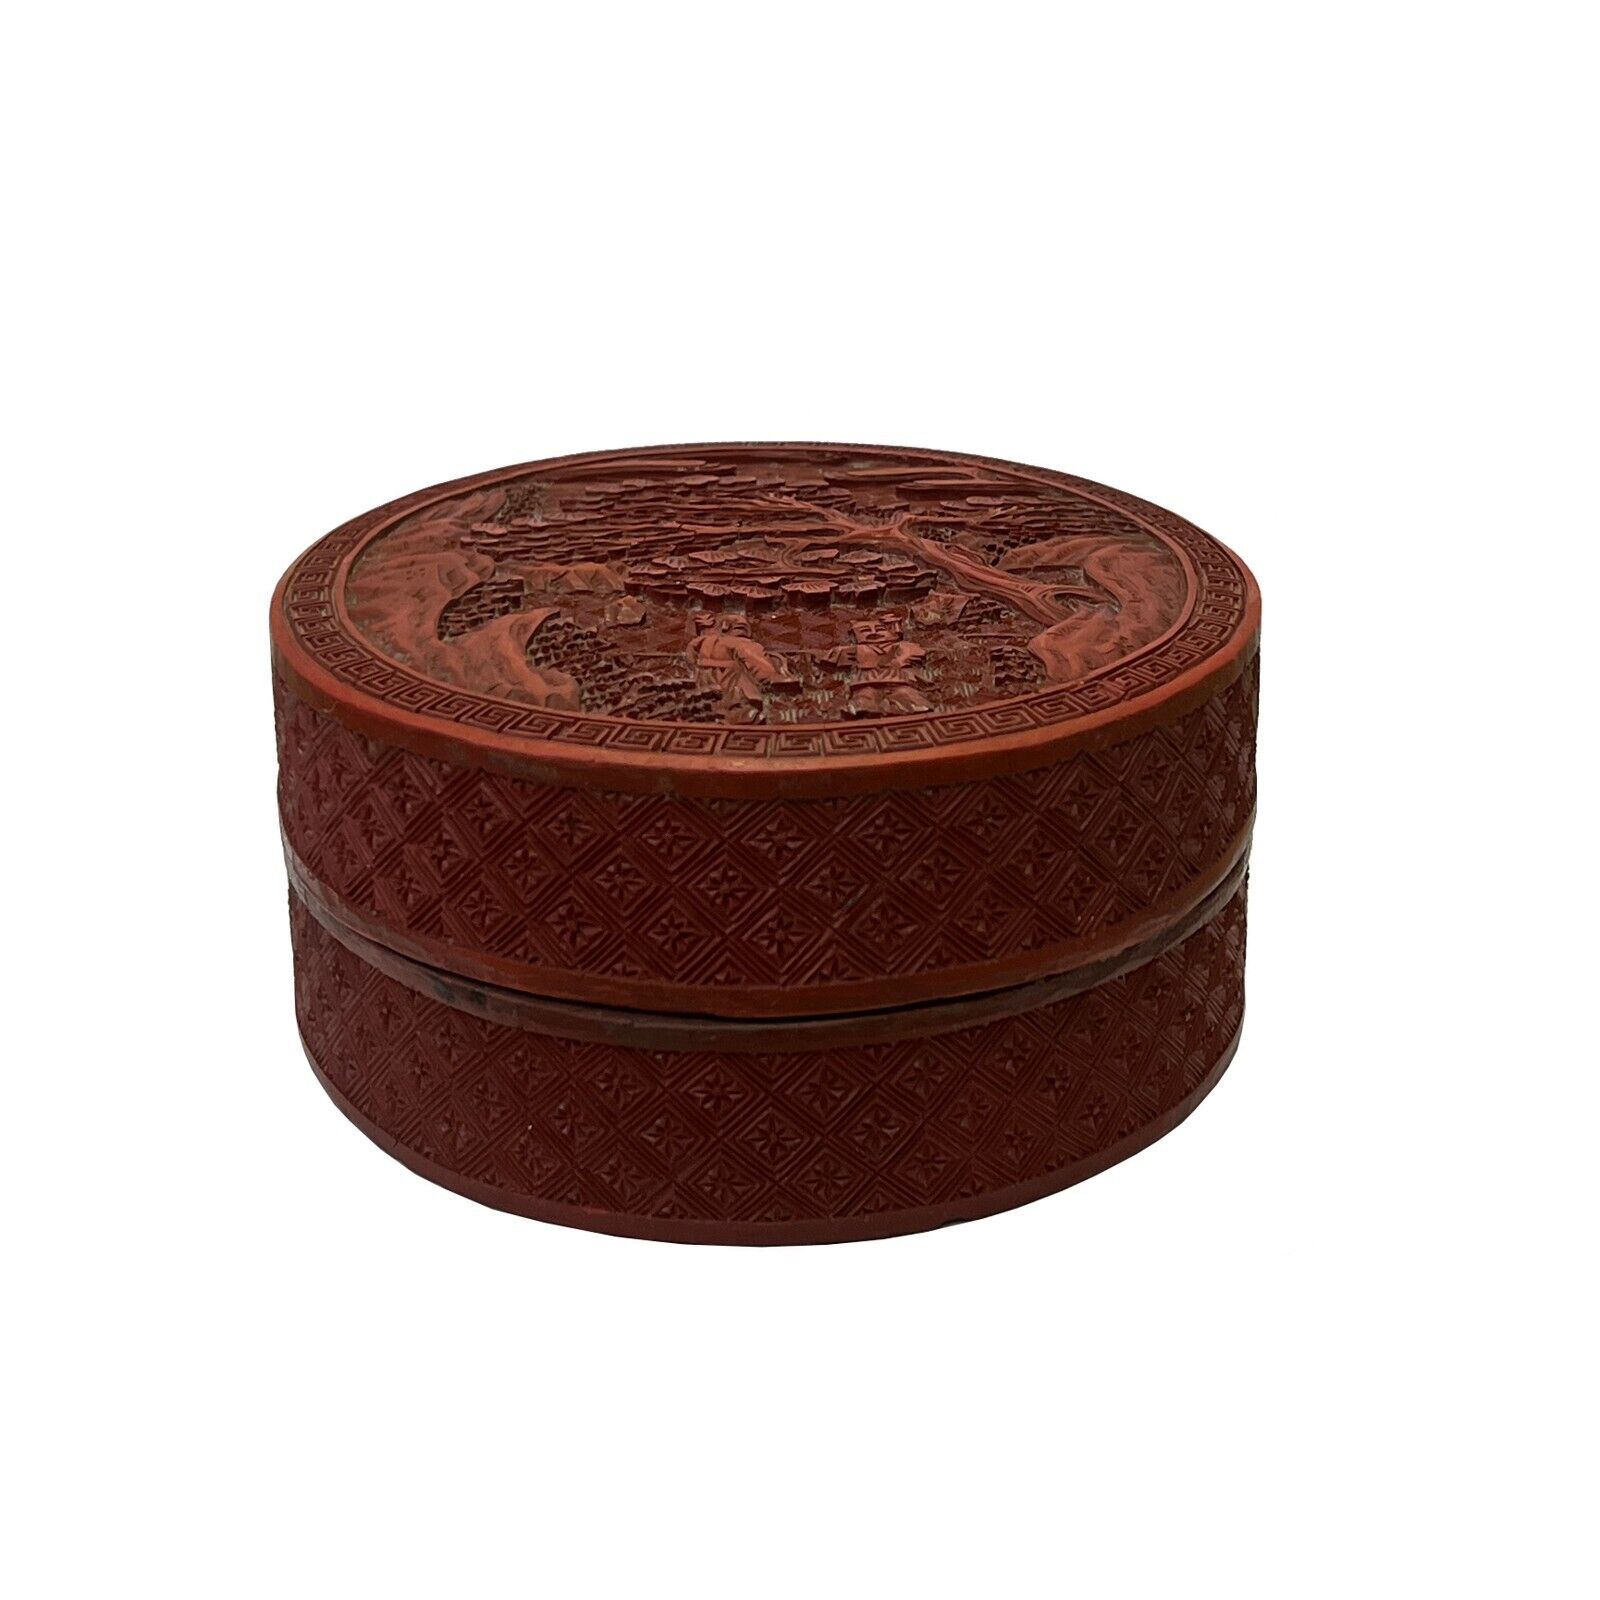 Vintage Chinese Red Resin Lacquer Round Carving Small Accent Box ws3012